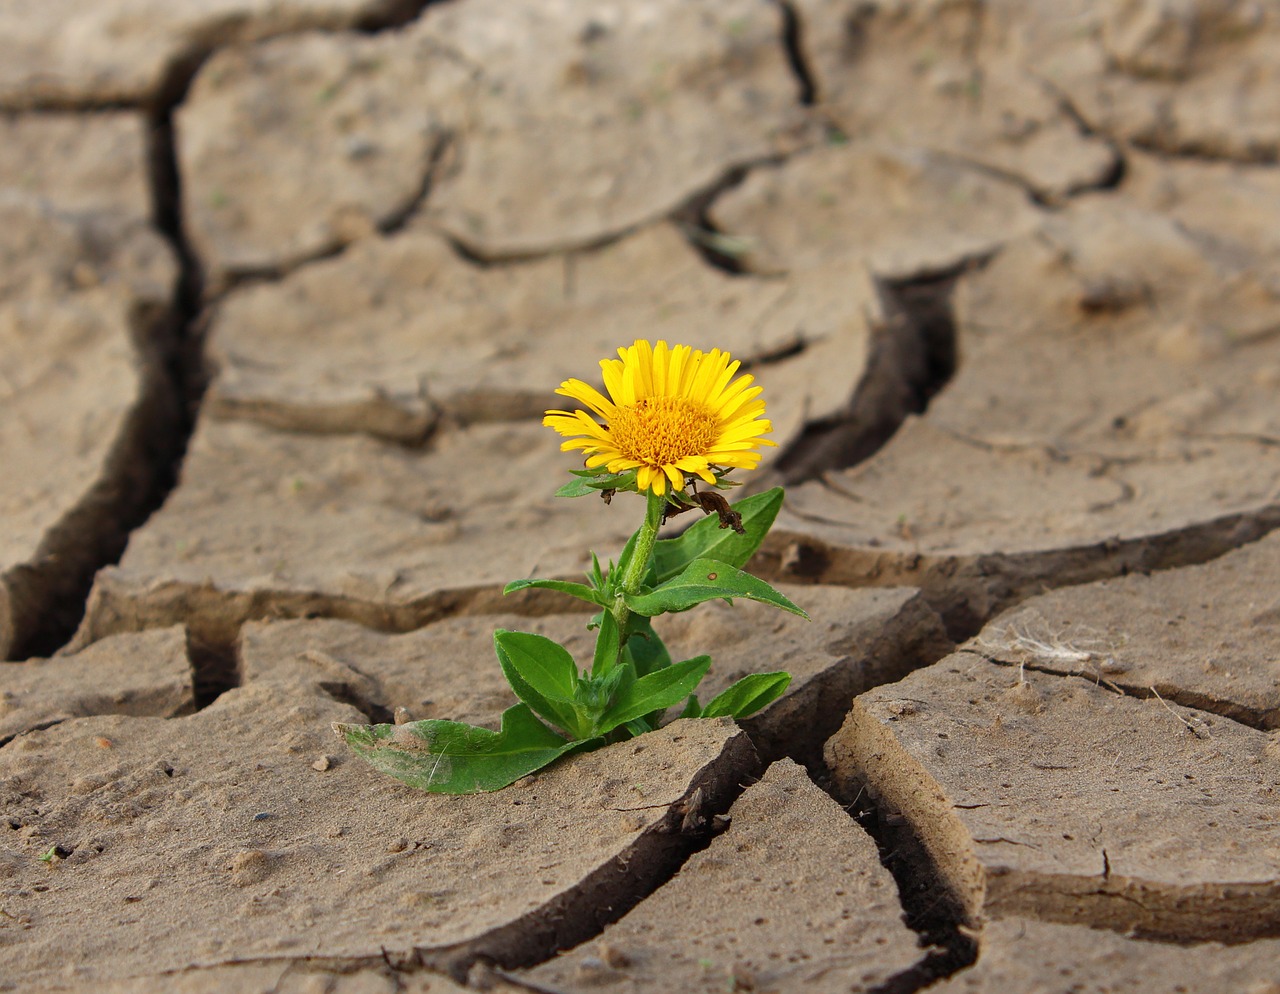 25 Ways to Grow Your Resilience Spiritual Living For Busy People